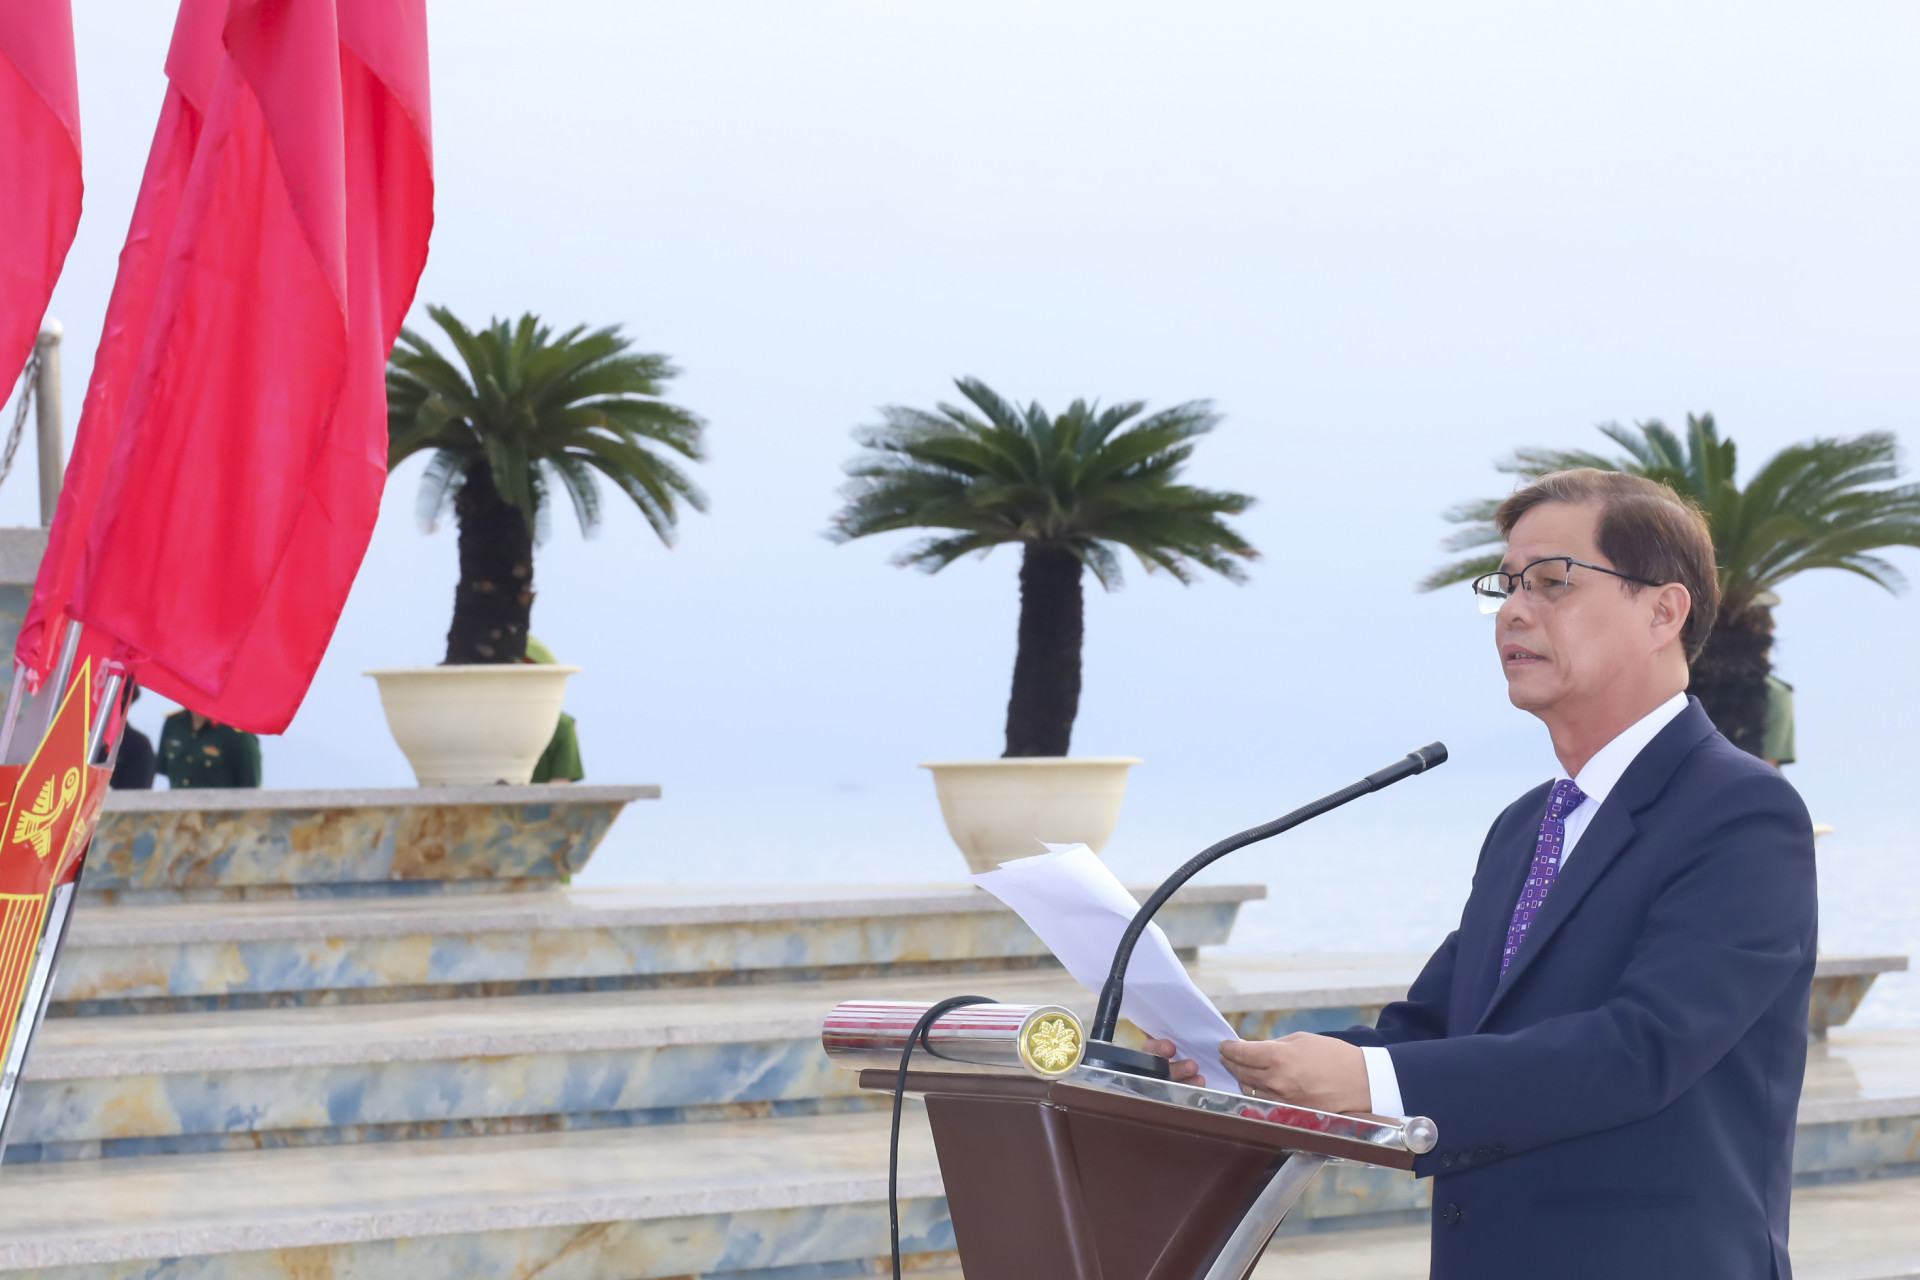 Nguyen Tan Tuan - Deputy Secretary of Khanh Hoa Provincial Party Committee and Chairman of the Provincial Peoples Committee, delivering speech at the flag-raising ceremony

